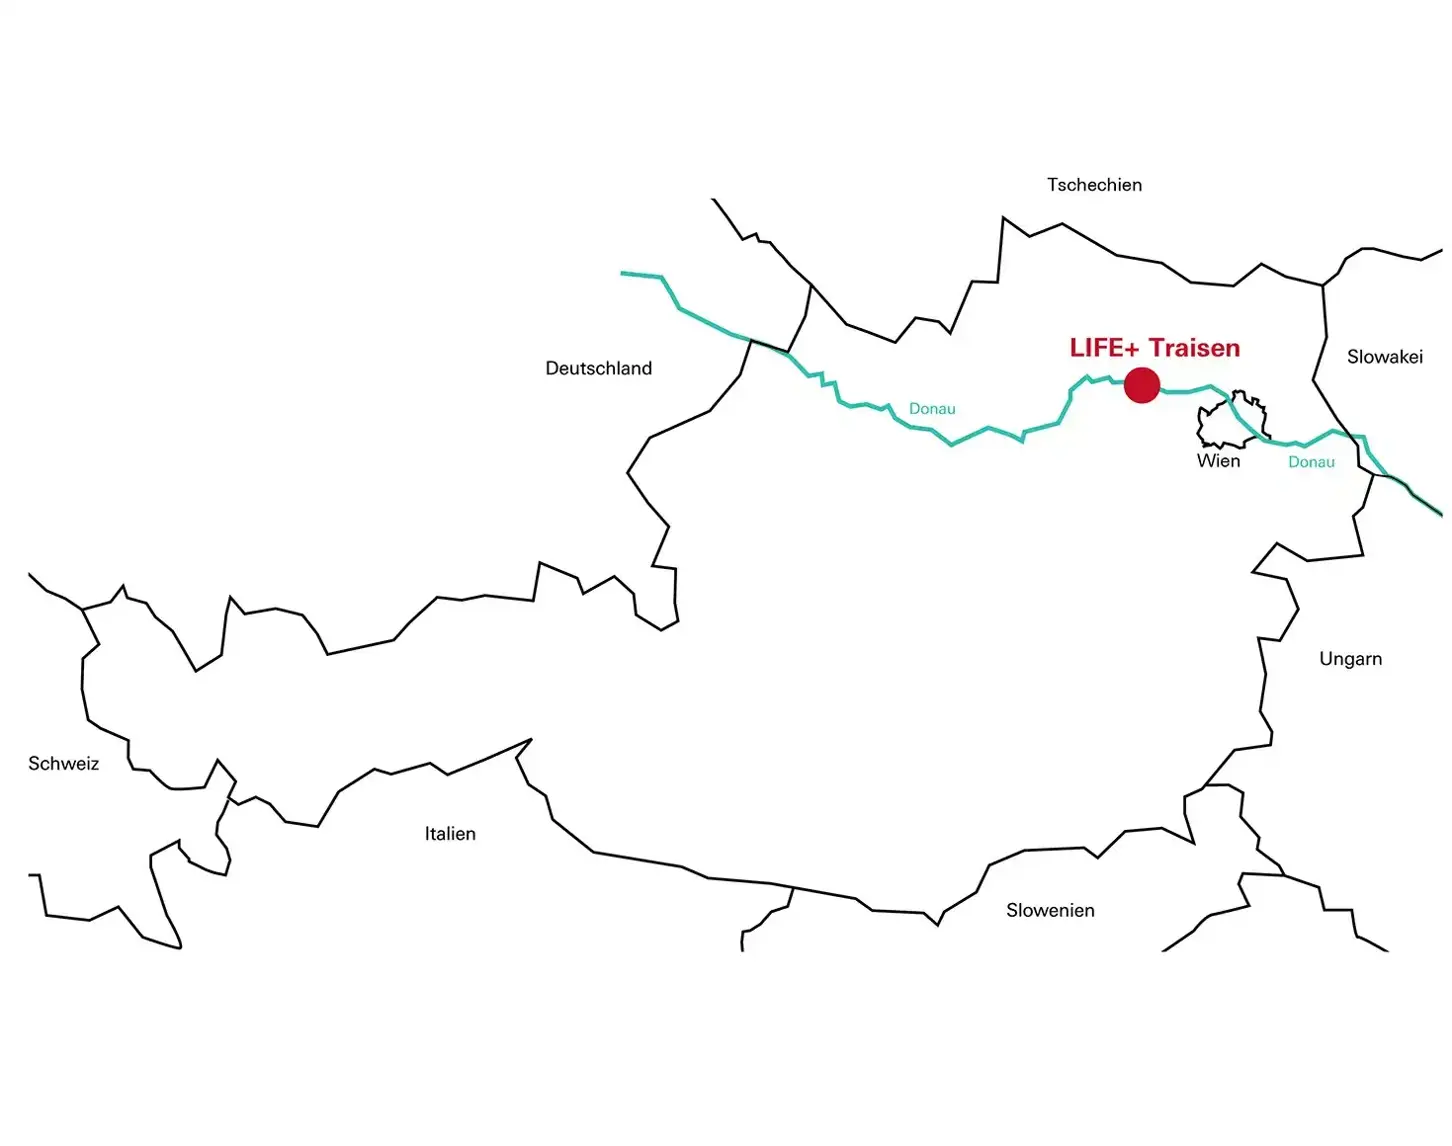 An overview of the Traisen project. The map of Austria shows roughly where the LIFE Traisen project is located.